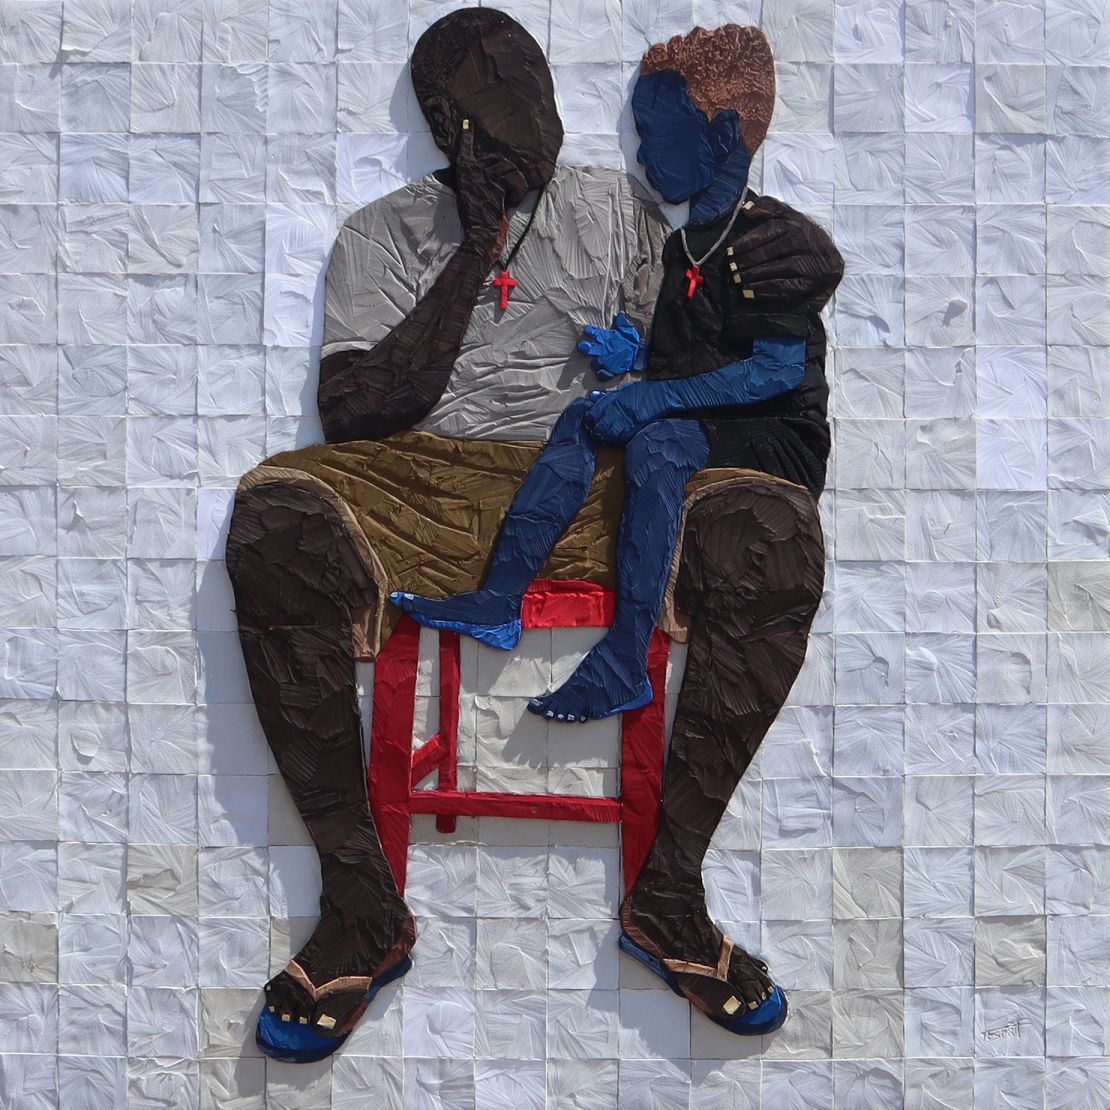 Tesprit worked with the soles of flip flops salvaged from landfill to create a 3D sculpture depicting fatherhood to complement Mr Eazi's song 'Mandela."